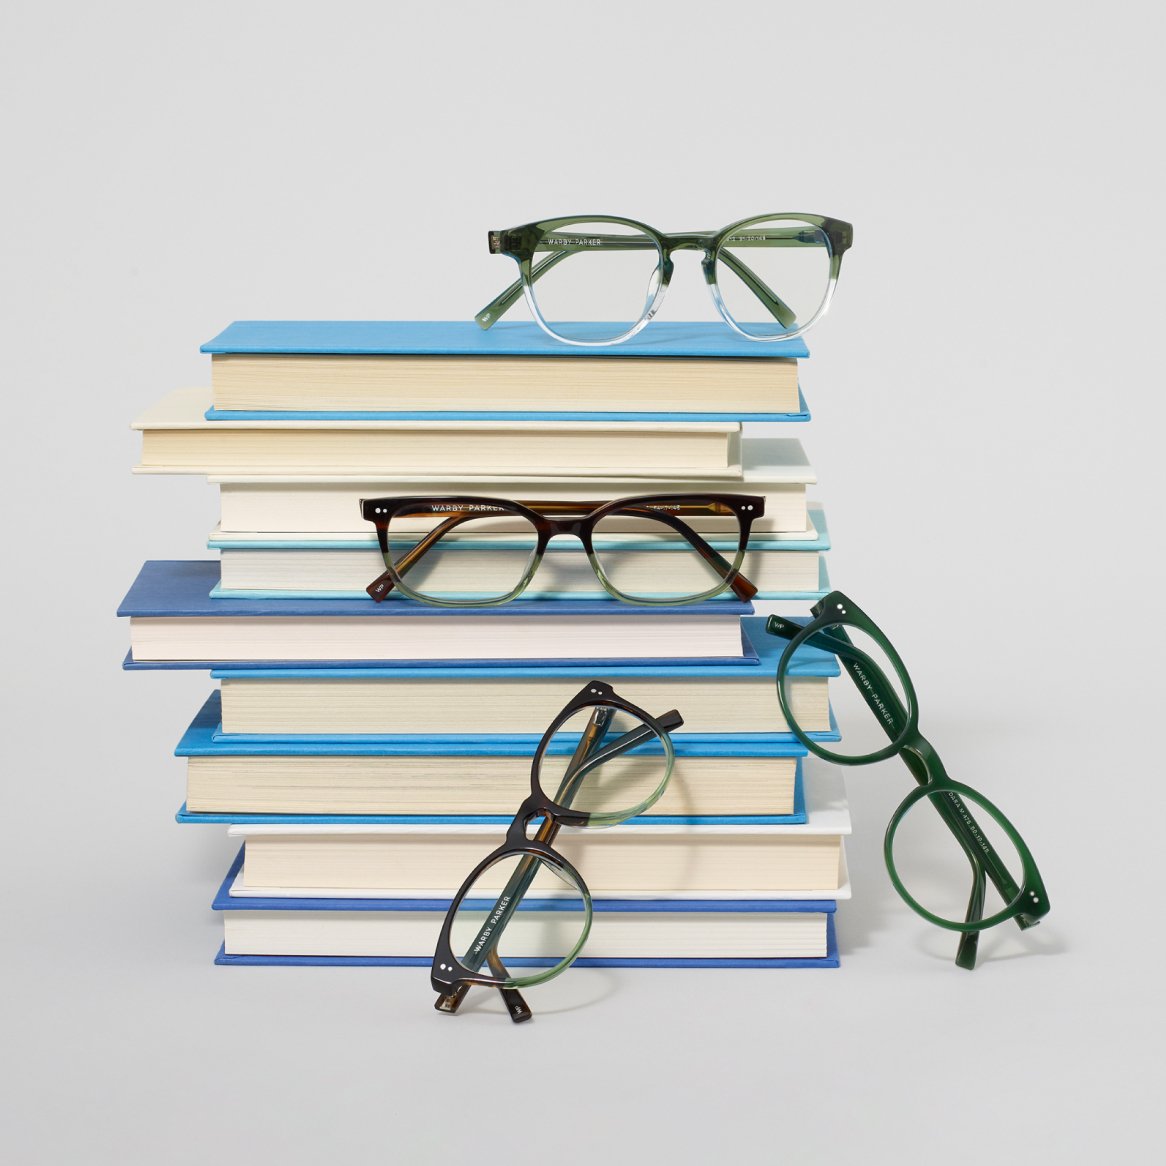 Glasses frames with stack of books